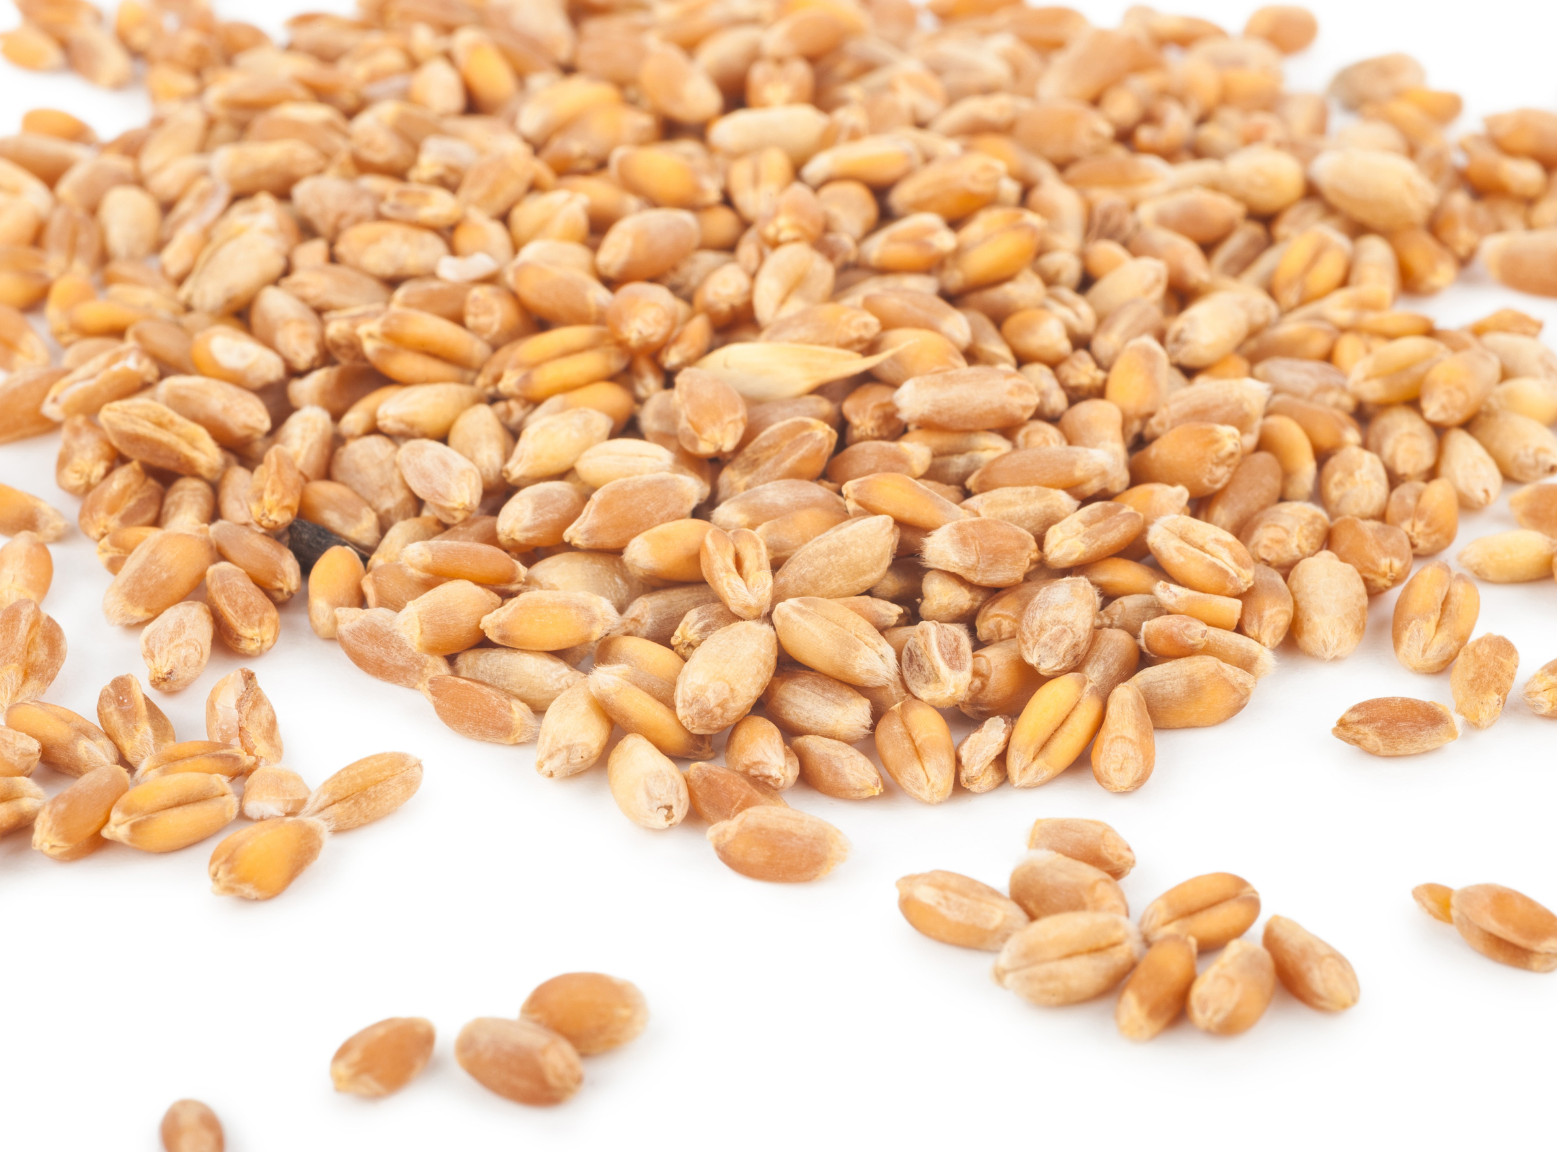 wheat grains on a white background